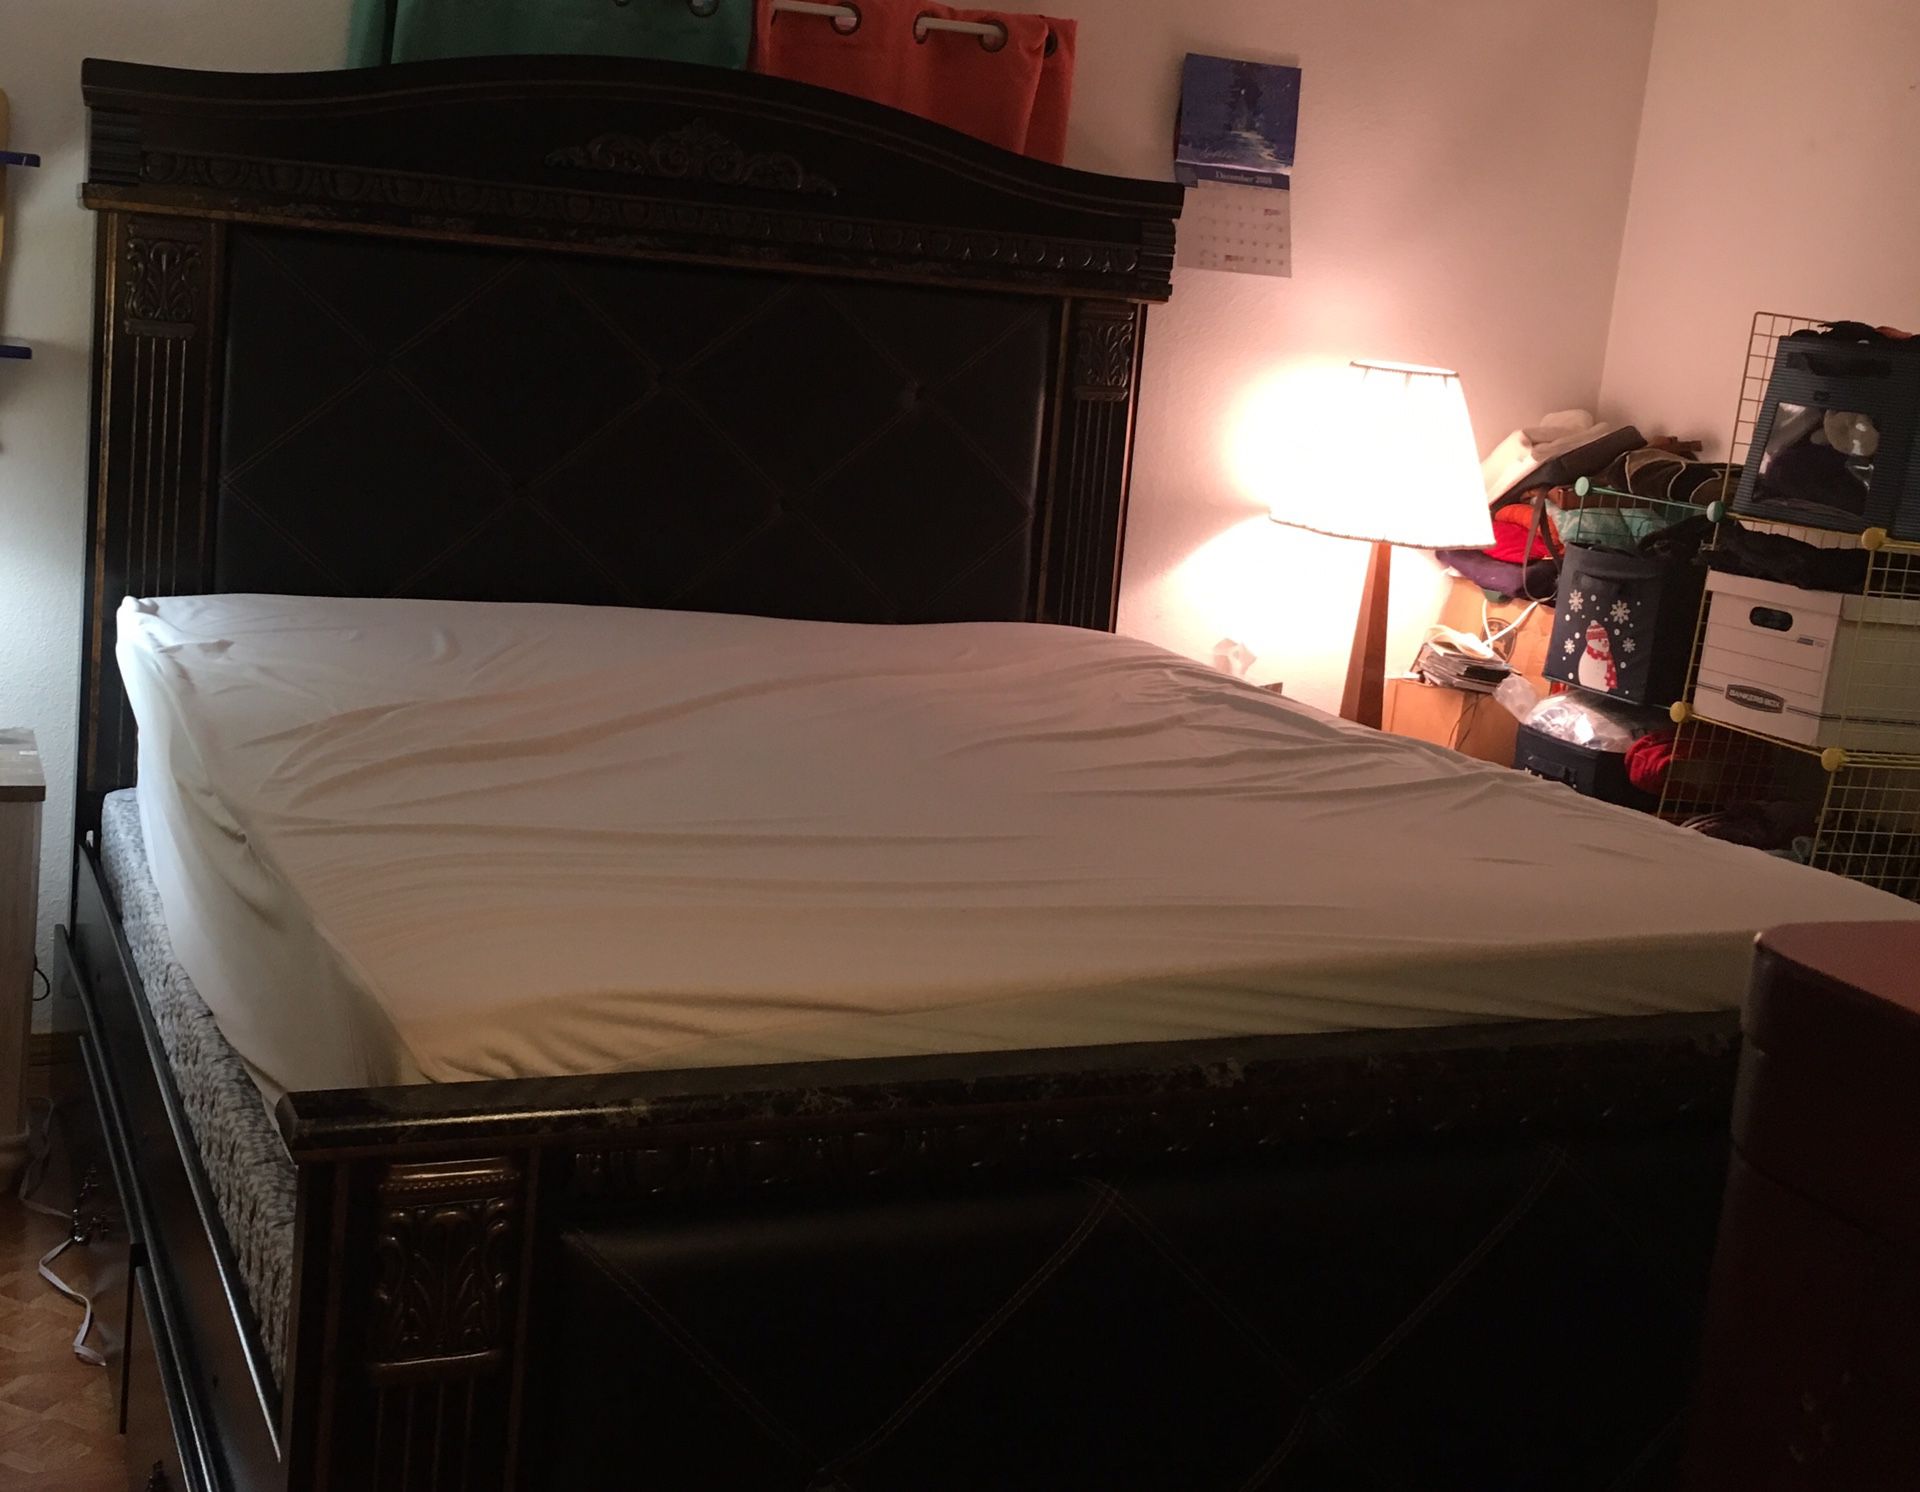 King Size Bed frame with mattress